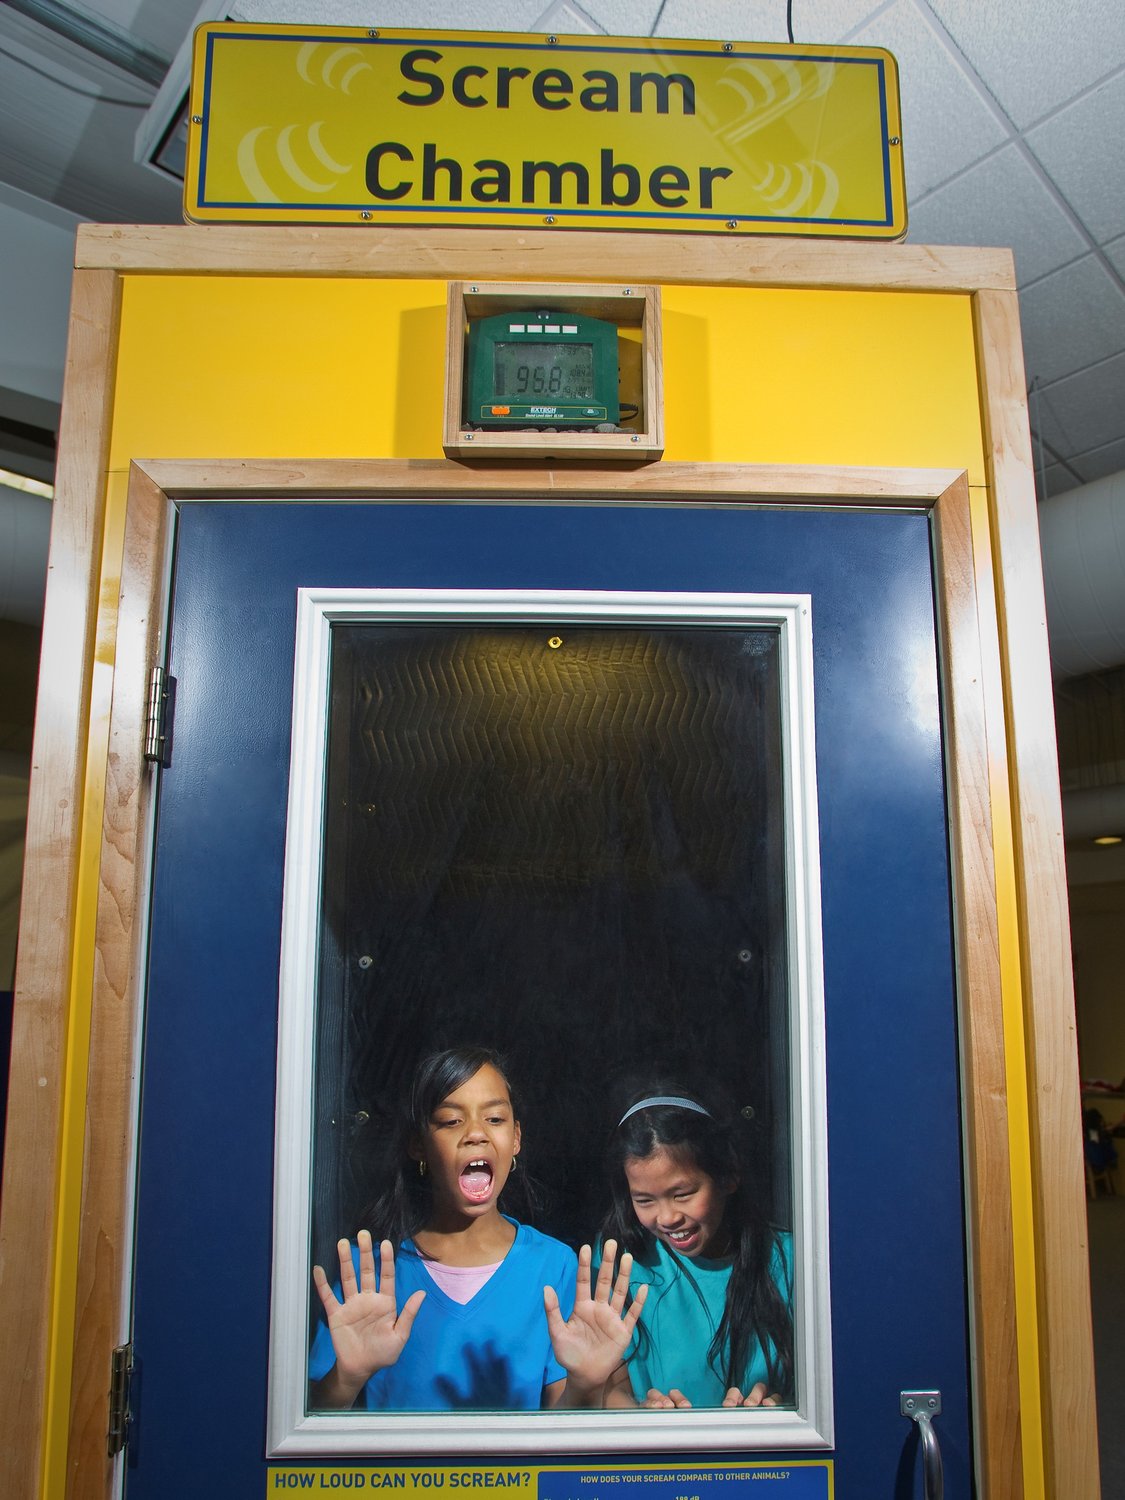 Kids can test their lung power as they learn about decibels in the Scream Chamber.